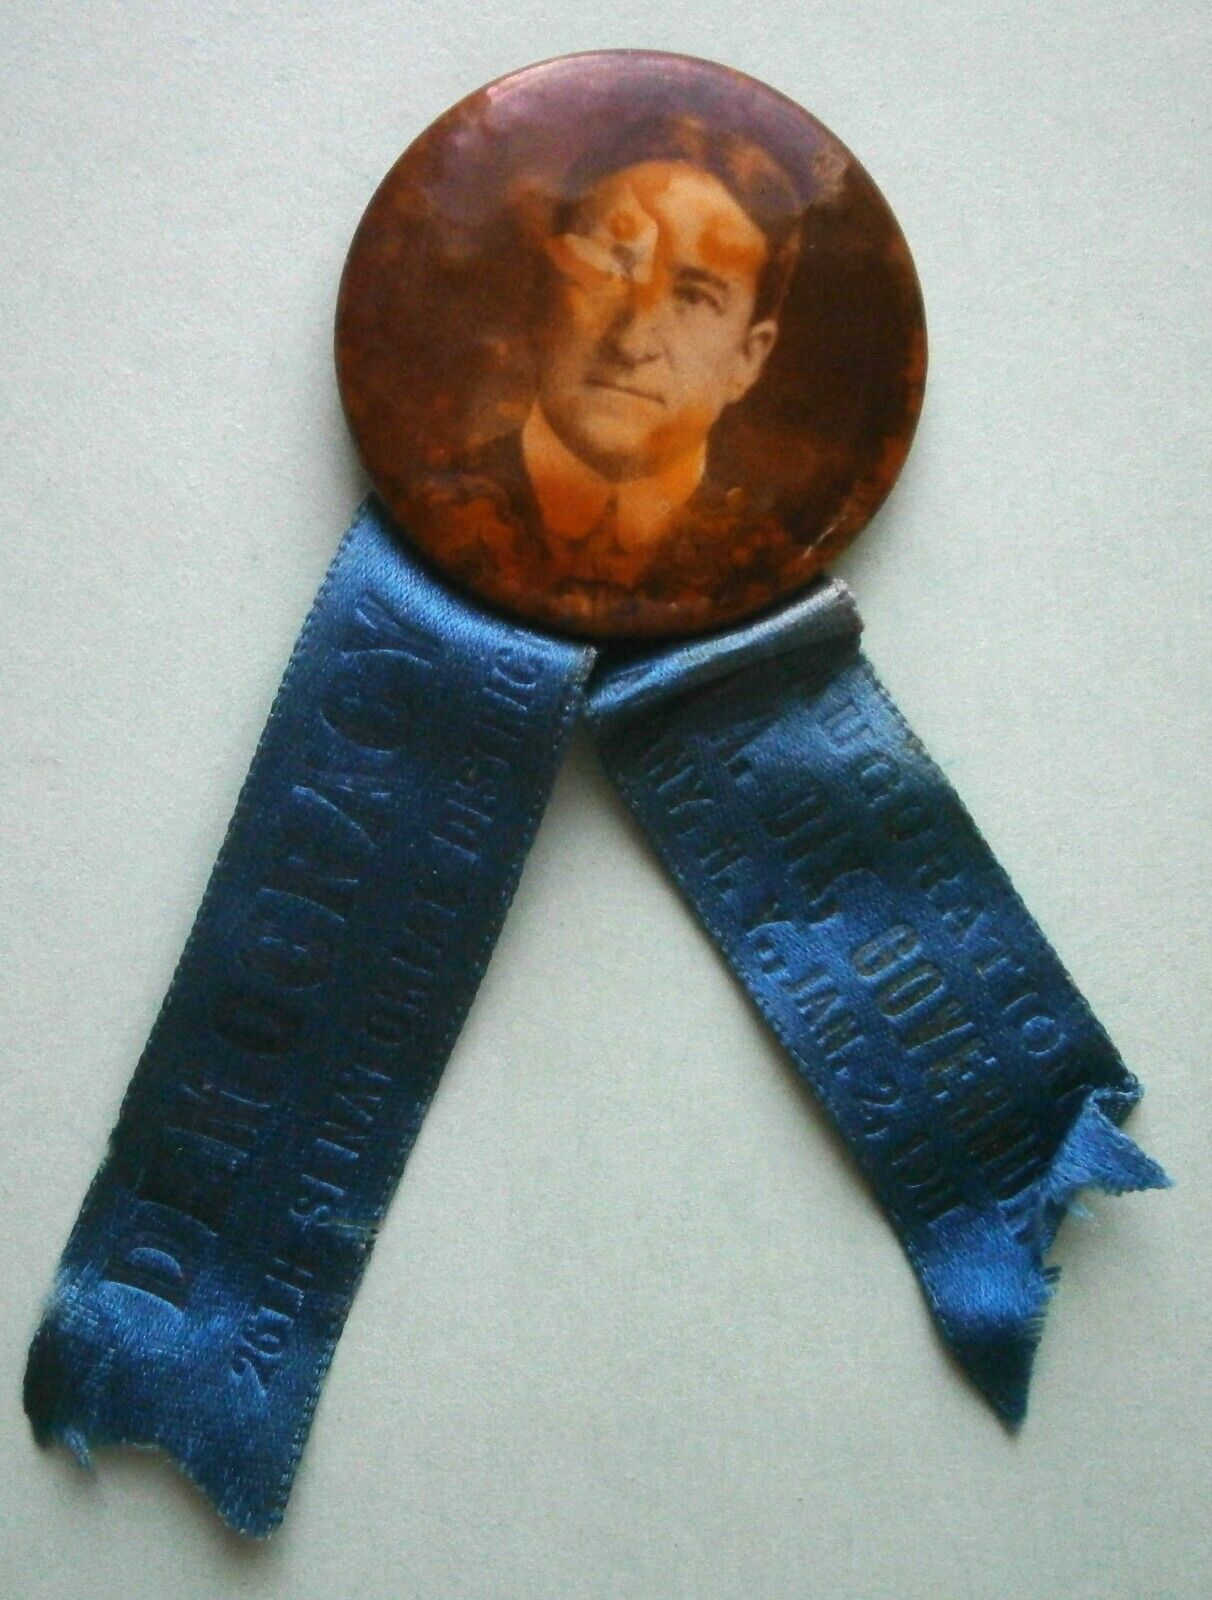 1911 John A. Dix Inauguration for Governor of NY Pinback Button & Ribbon